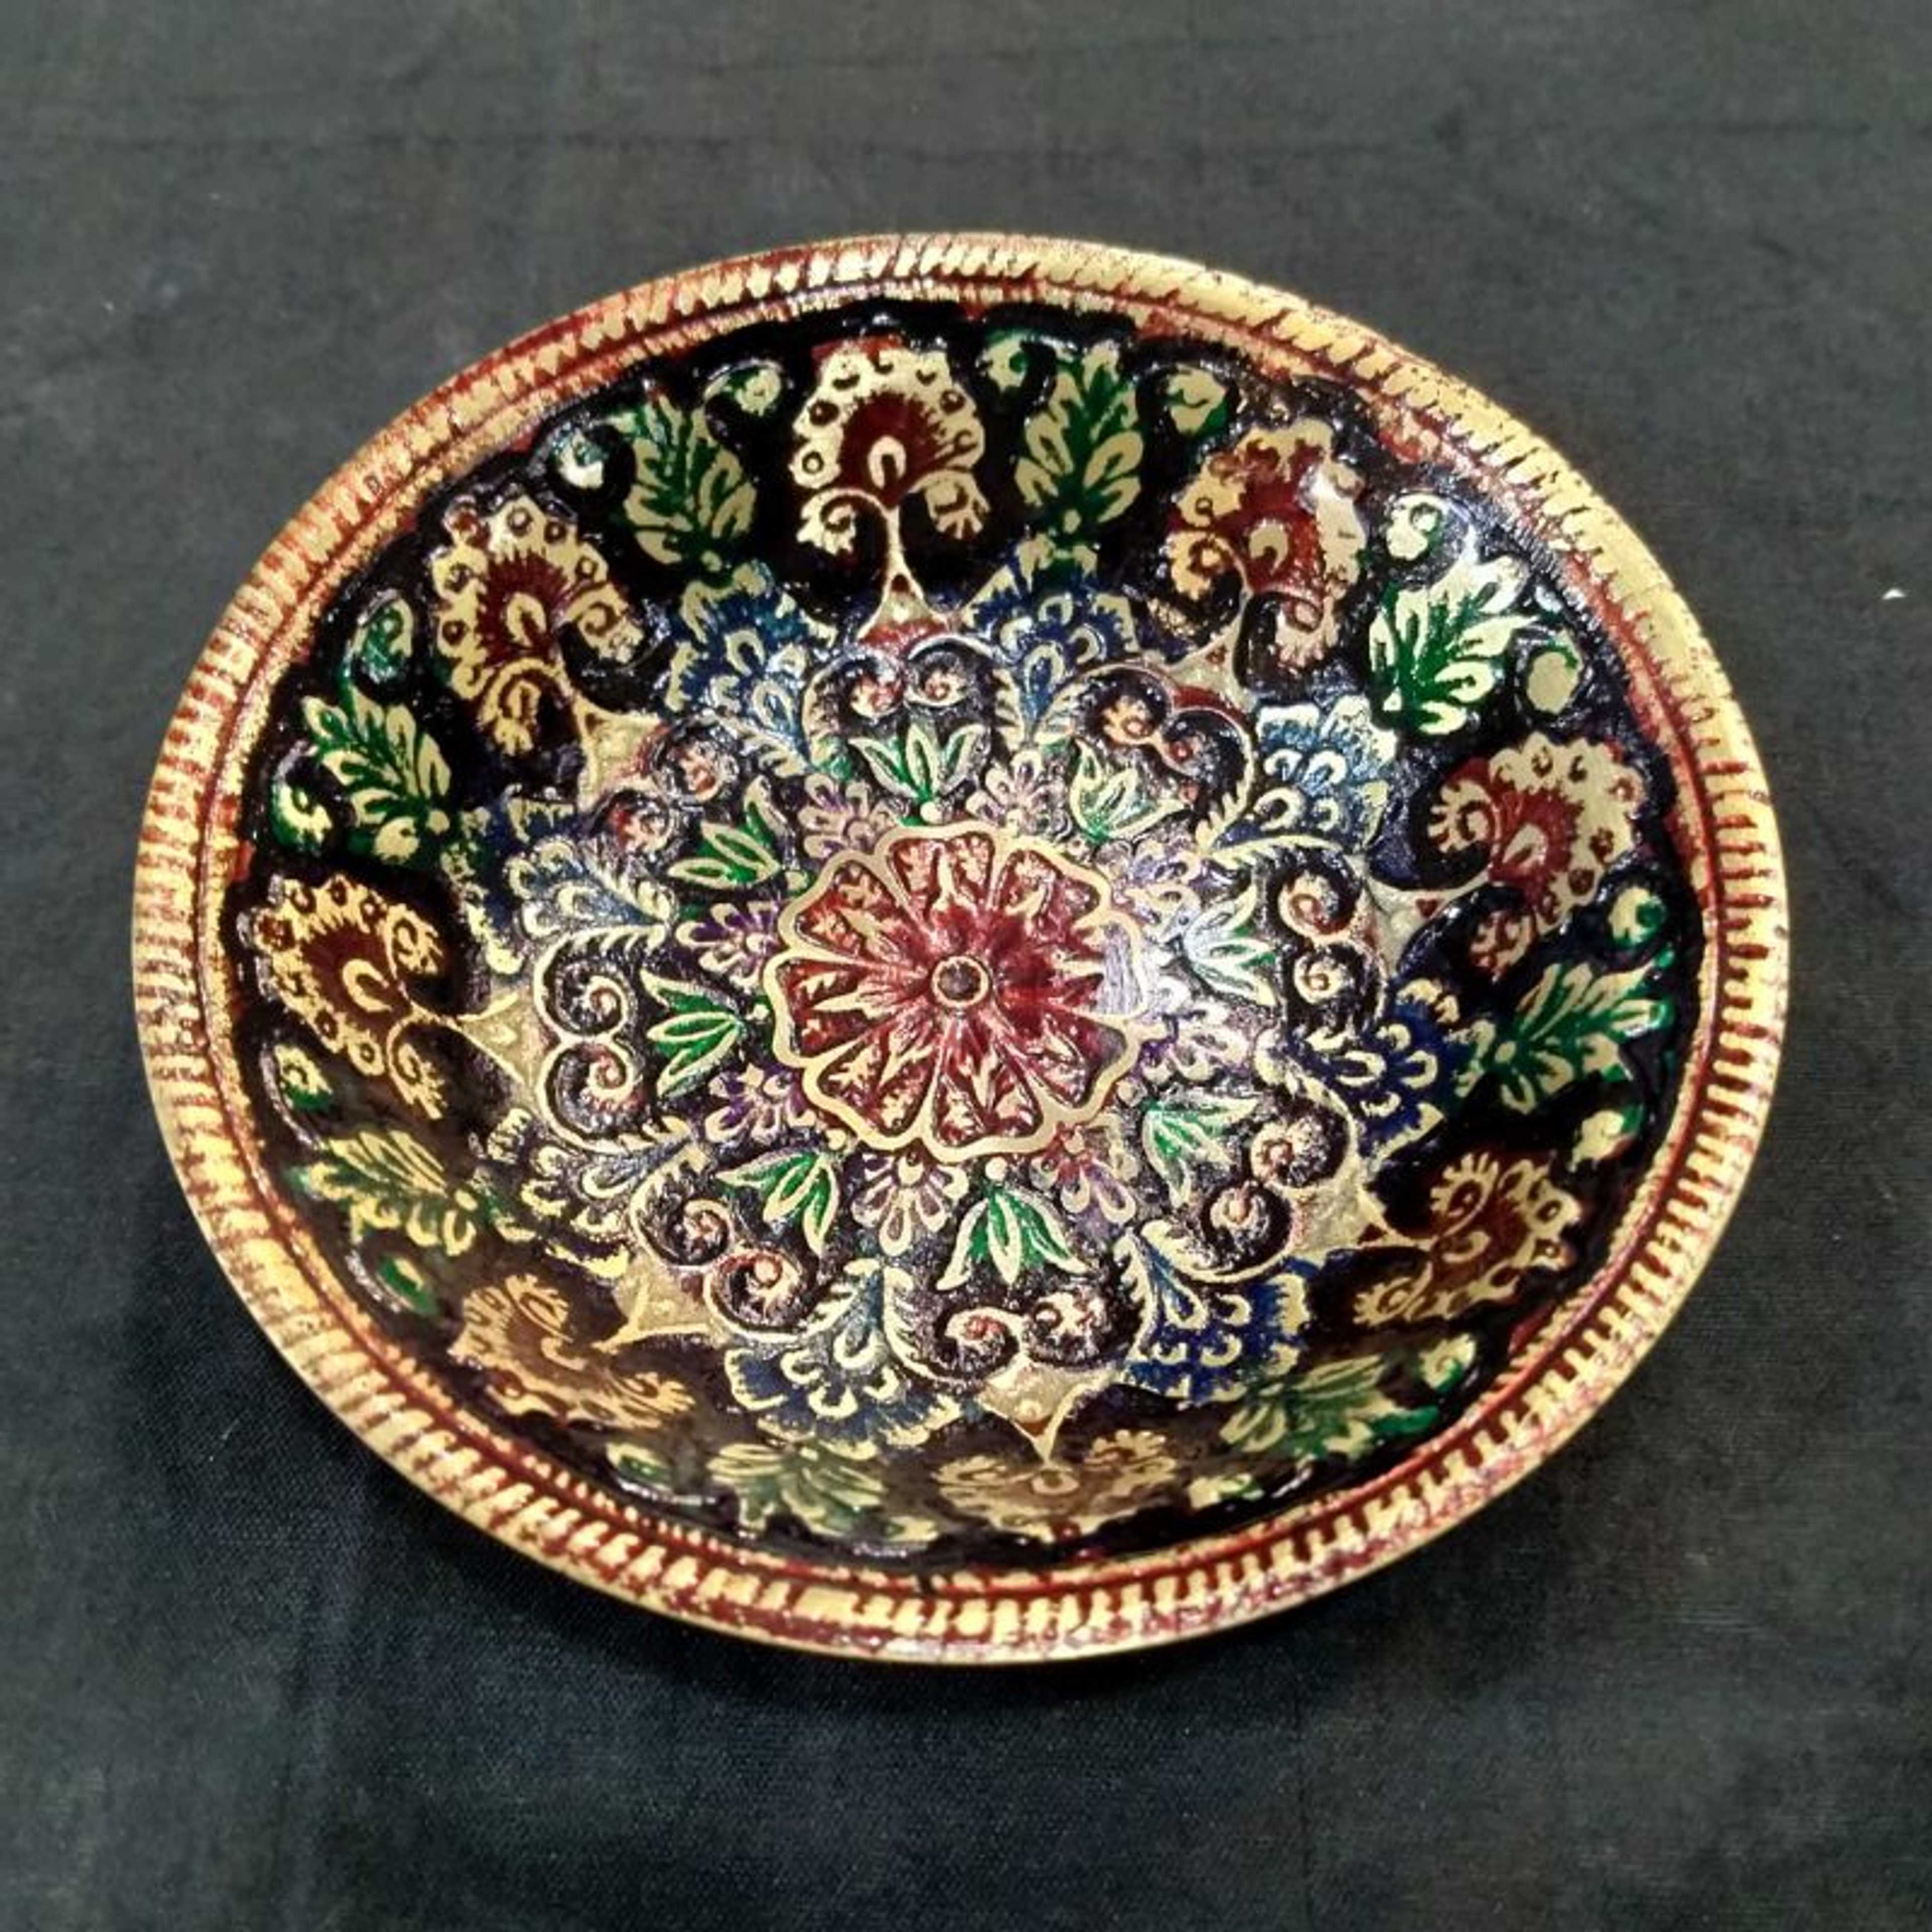 Brass colorful Bowl / Home decor / handicrafts / CULTURAL / TRADITIONAL /